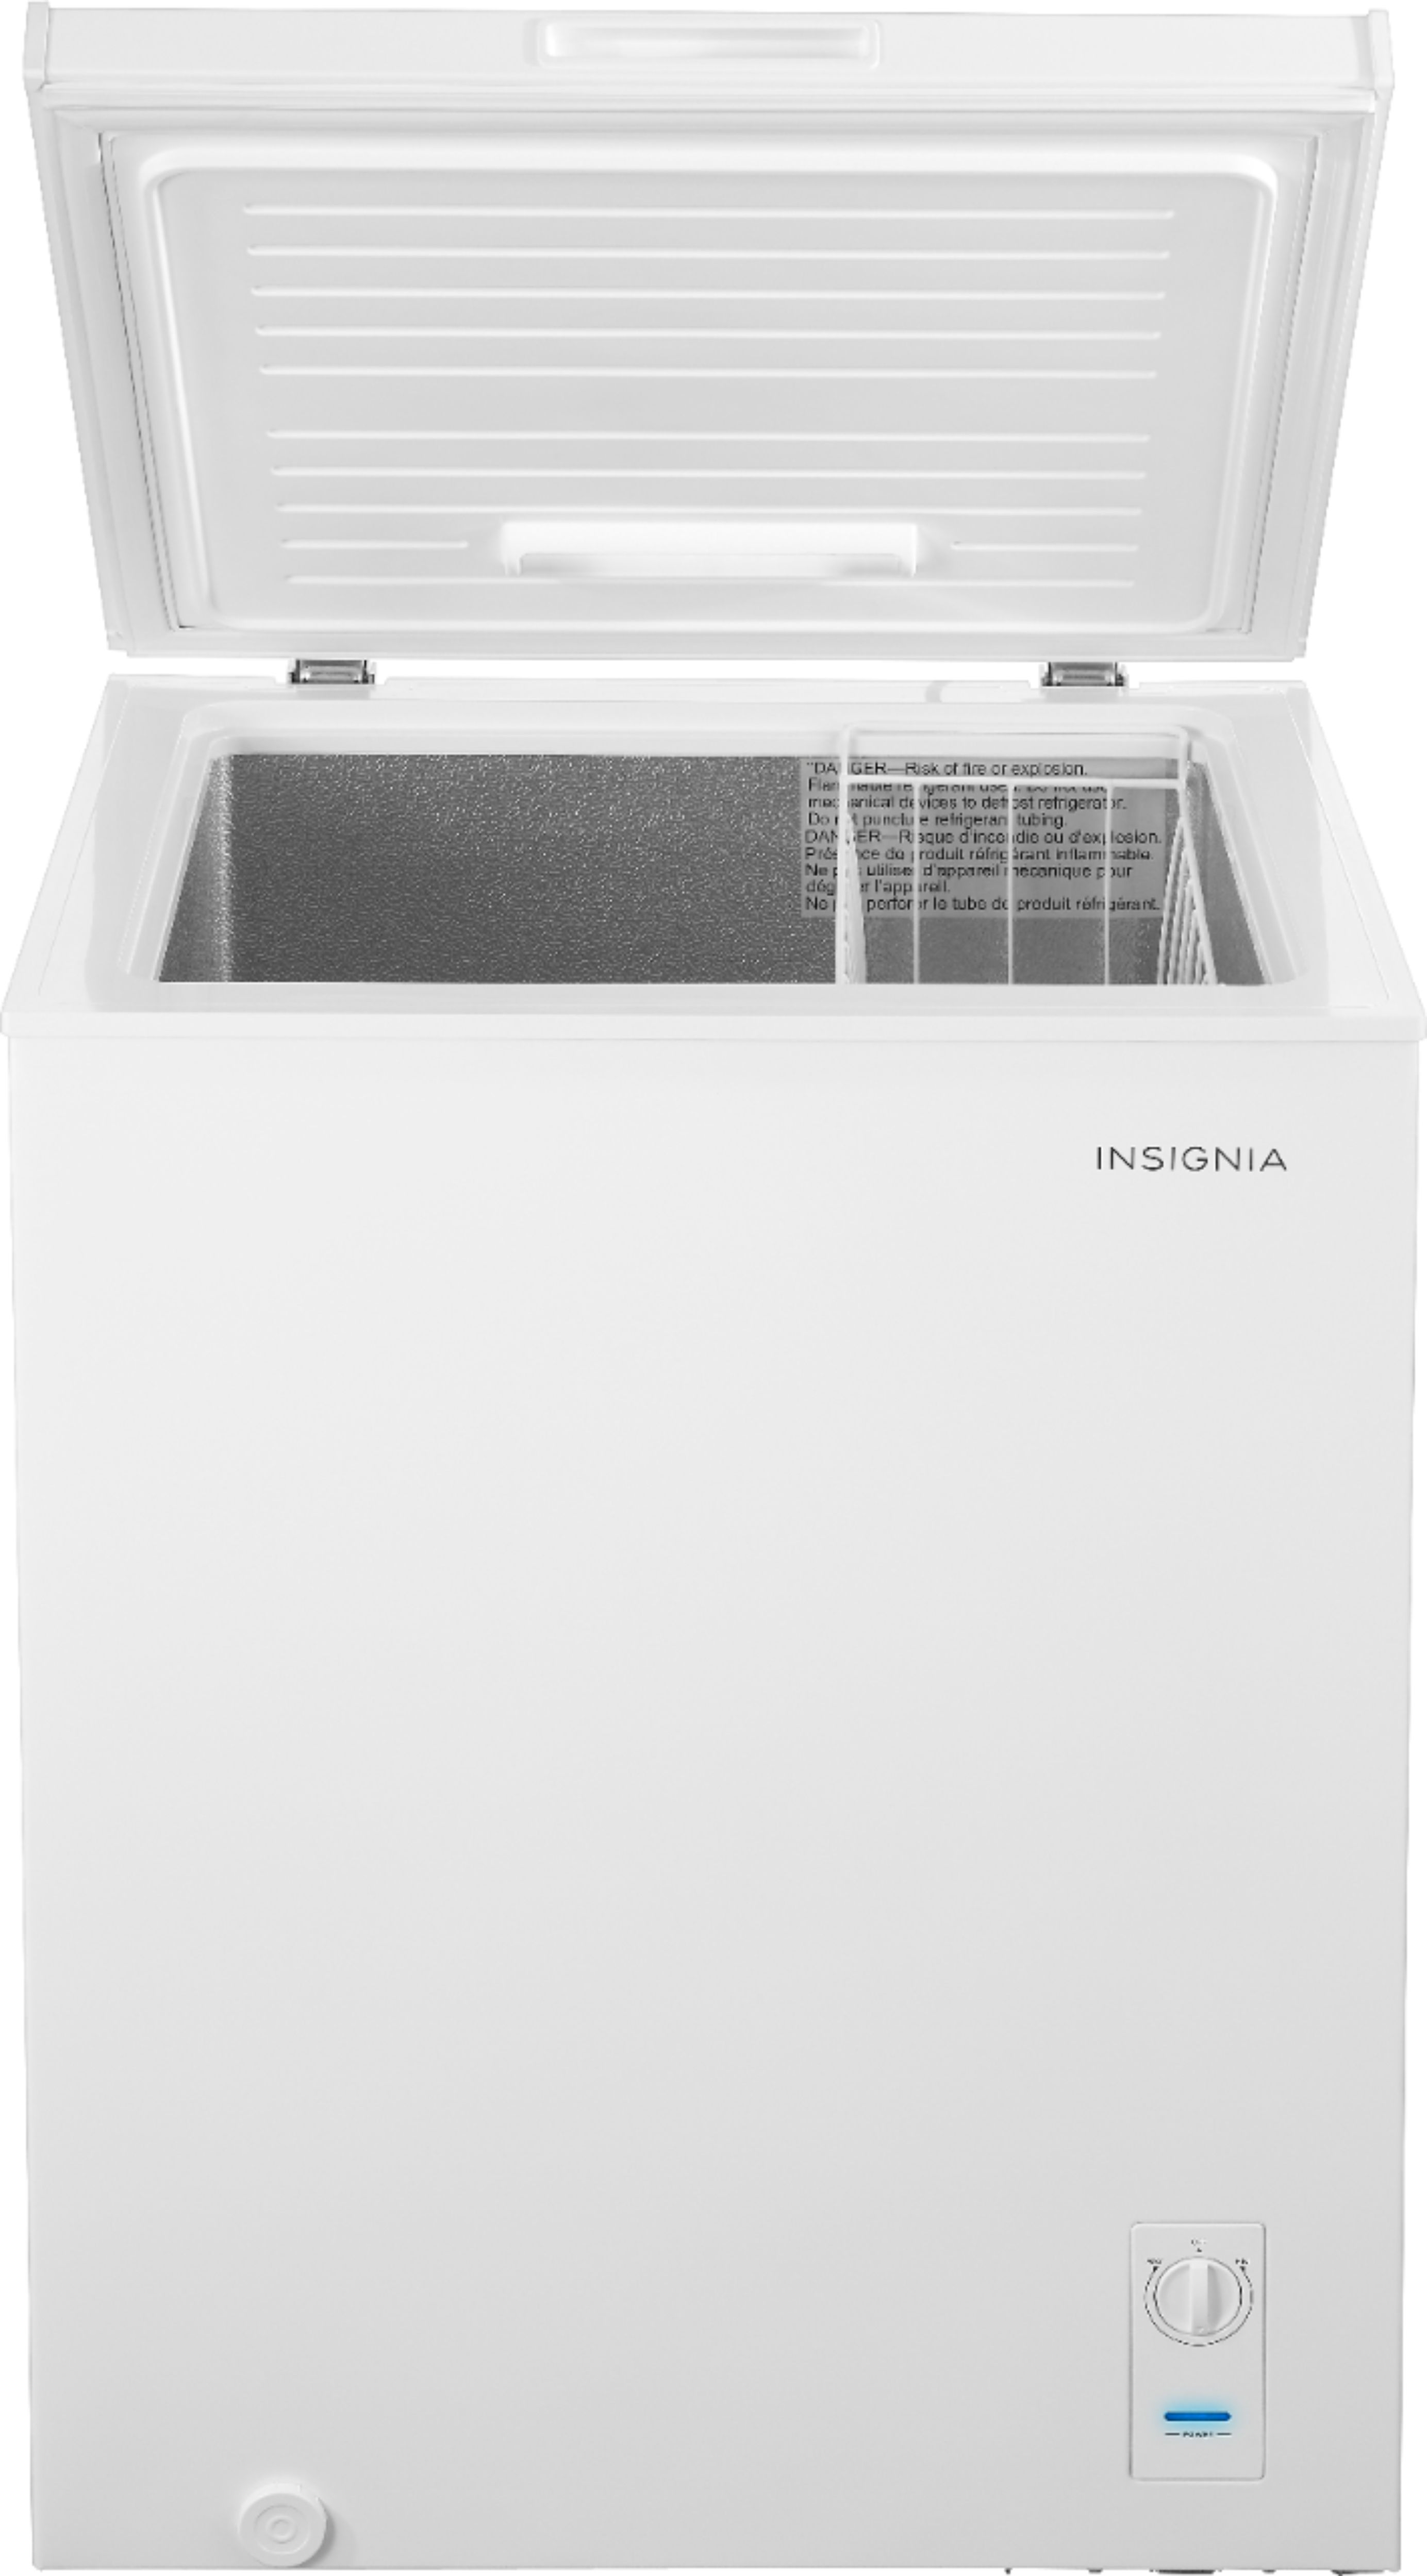 Insignia 5 0 Cu Ft Chest Freezer White Ns Cz50wh0 Best Buy